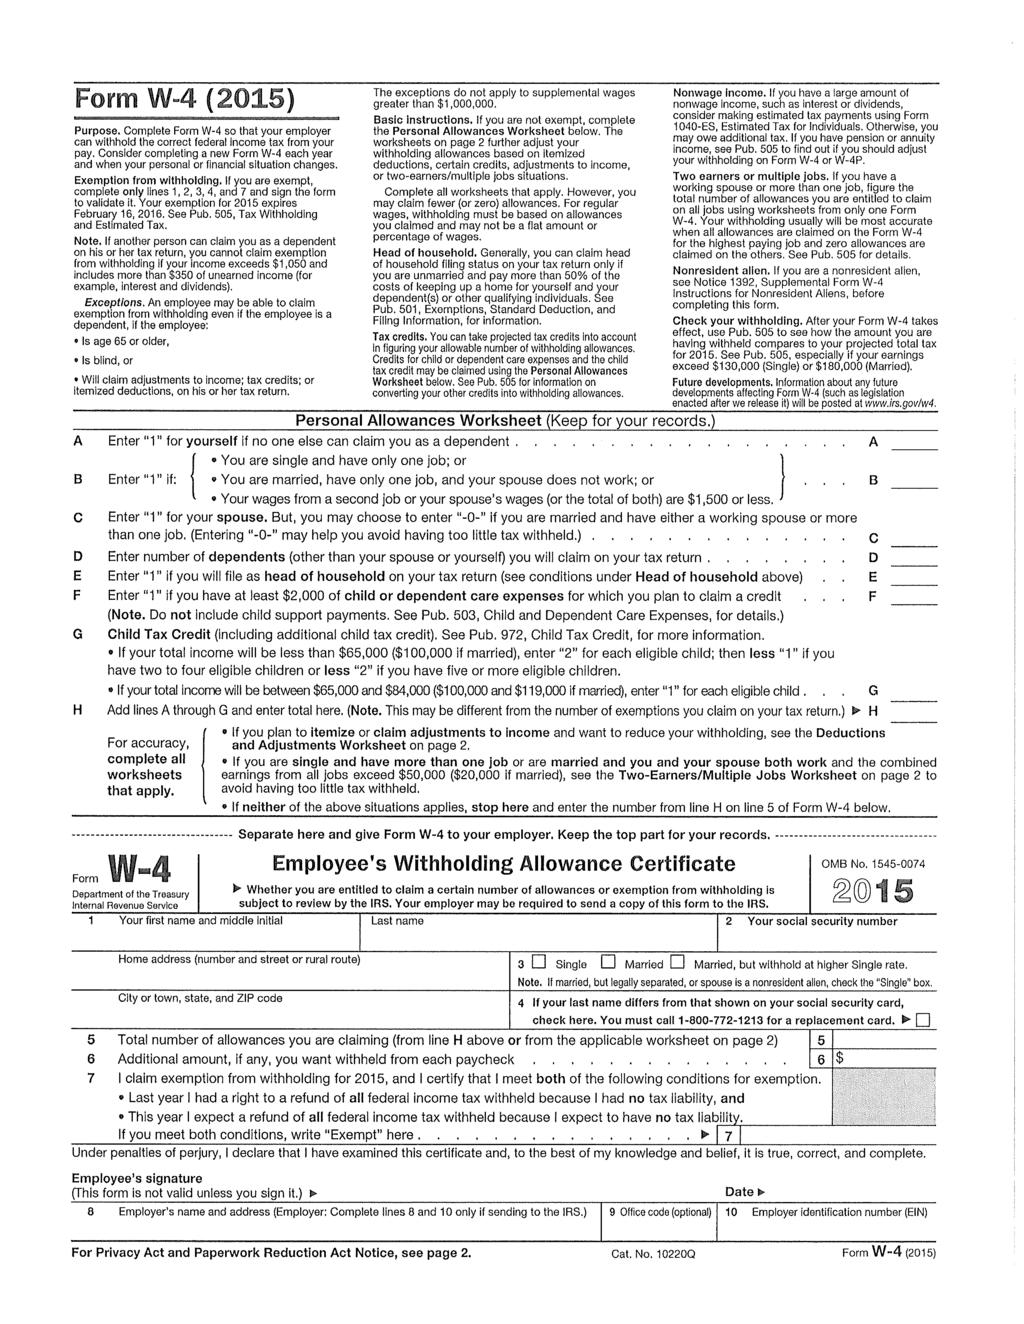 Form W4 (2015) Purpose. Complete Form W-4 so that your employer can withhold the correct federal Income tax from your pay.